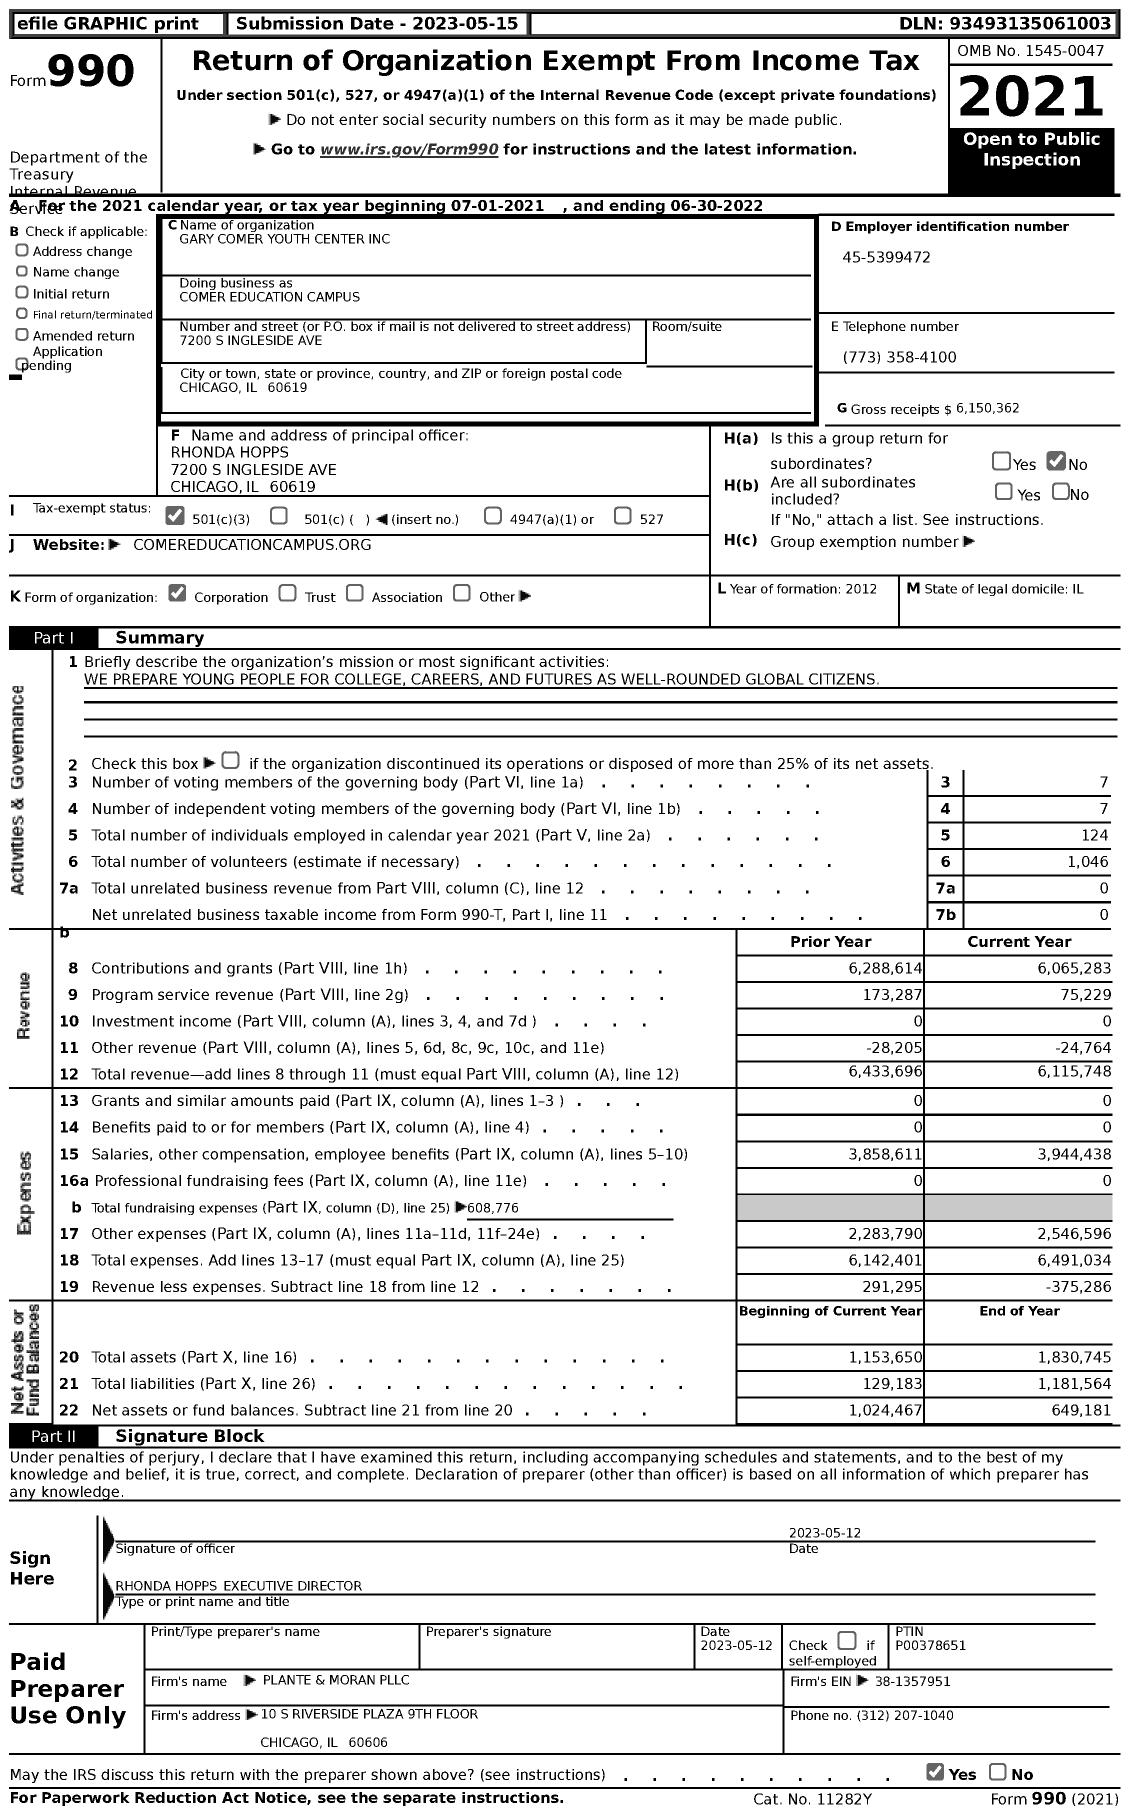 Image of first page of 2021 Form 990 for Comer Education Campus